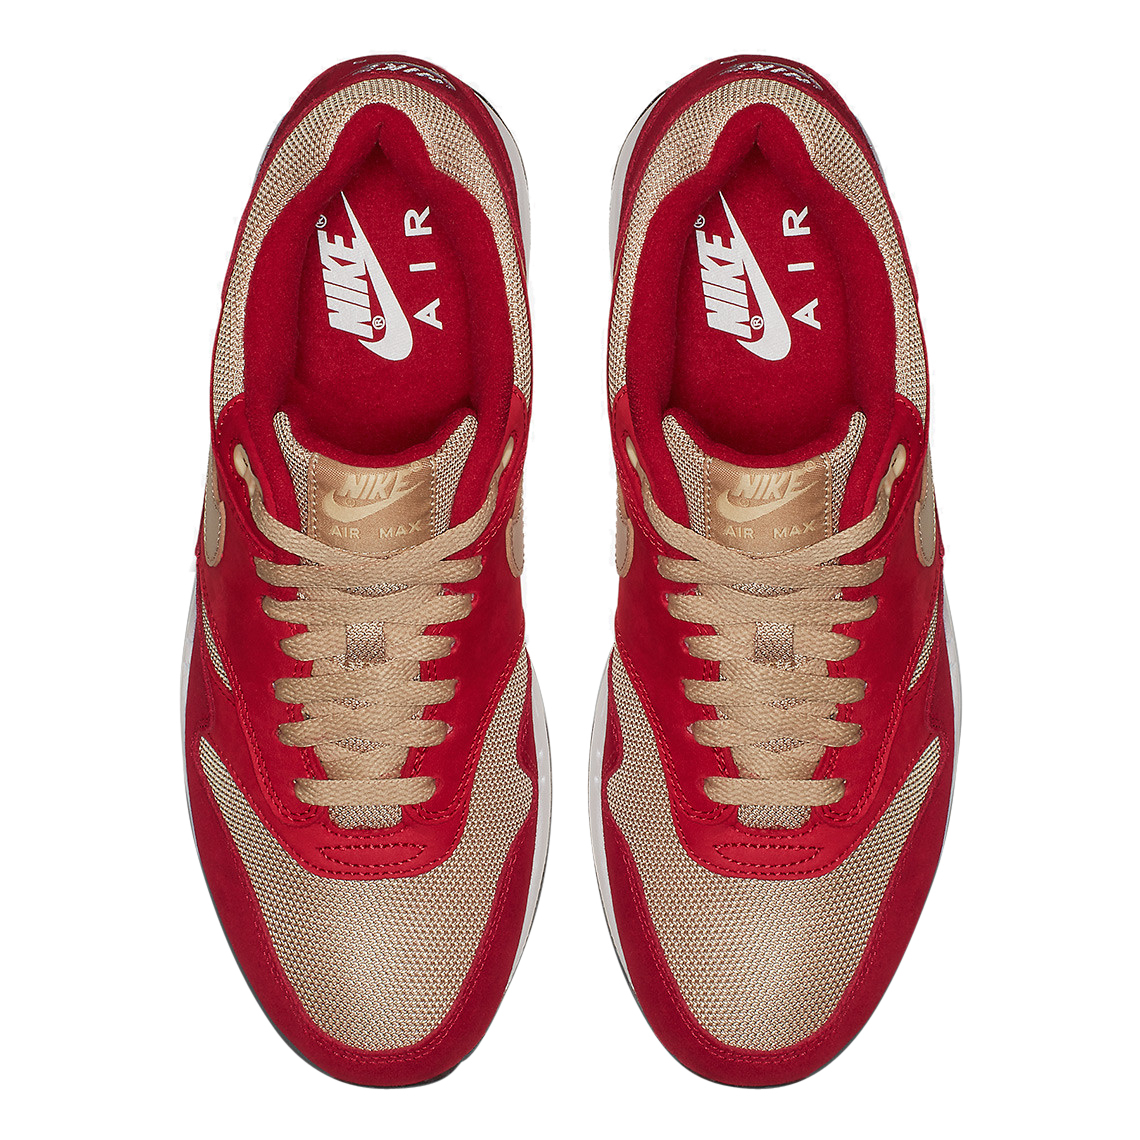 Nike Air Max 1 Red Curry 908366-600